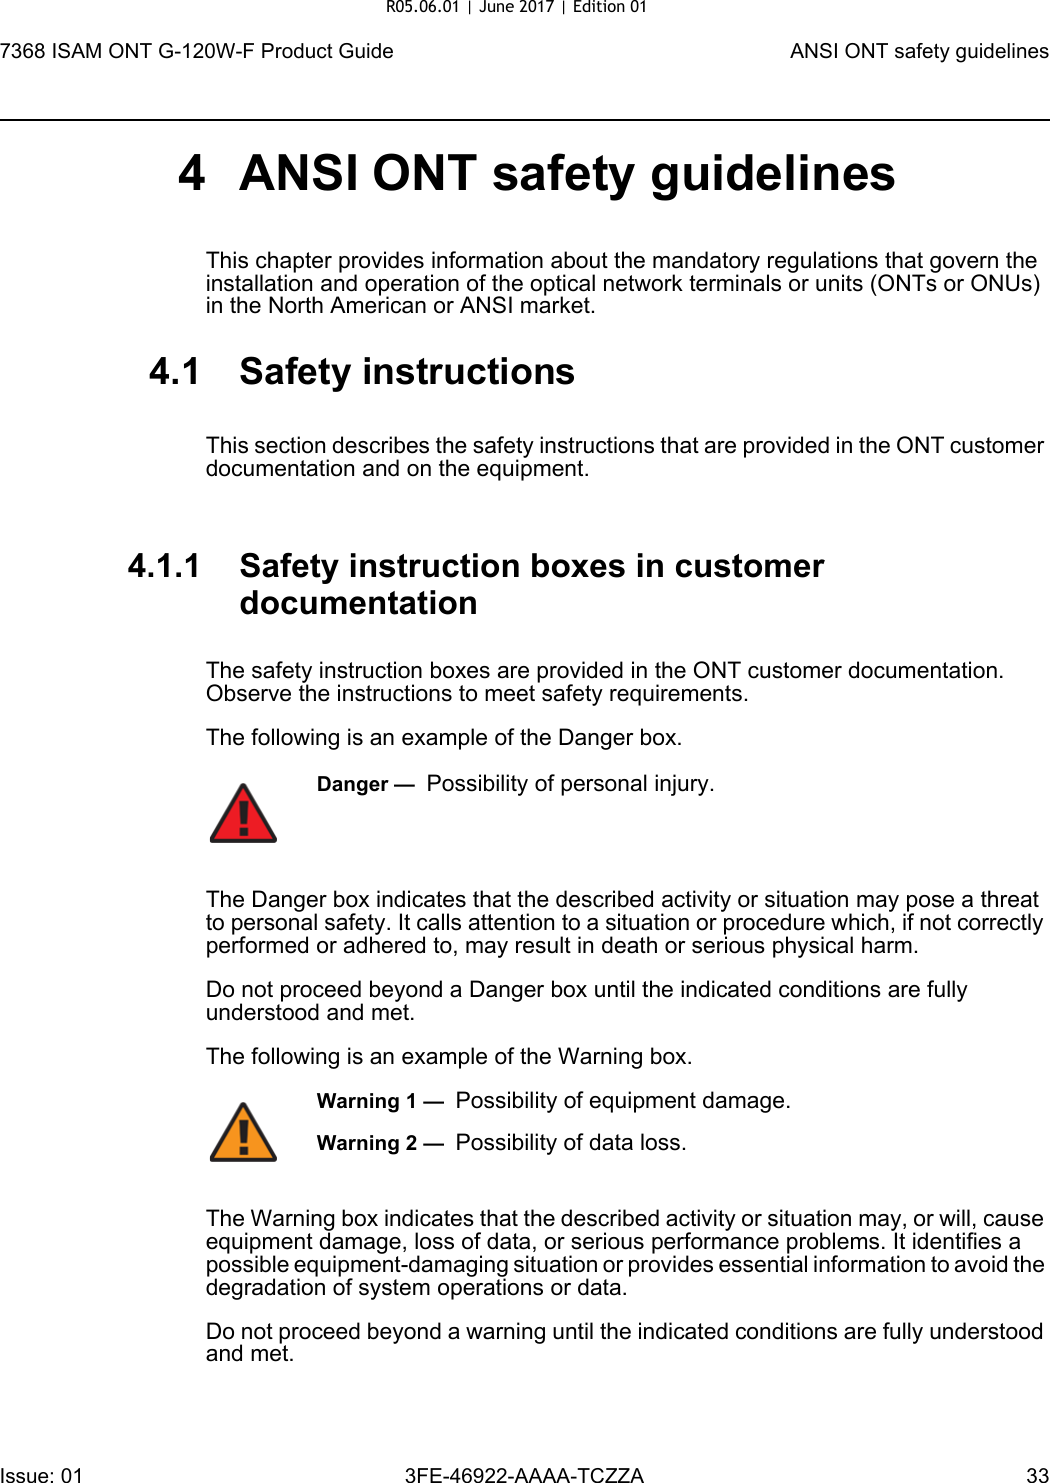 7368 ISAM ONT G-120W-F Product Guide ANSI ONT safety guidelinesIssue: 01 3FE-46922-AAAA-TCZZA 33 4 ANSI ONT safety guidelinesThis chapter provides information about the mandatory regulations that govern the installation and operation of the optical network terminals or units (ONTs or ONUs) in the North American or ANSI market.4.1 Safety instructionsThis section describes the safety instructions that are provided in the ONT customer documentation and on the equipment.4.1.1 Safety instruction boxes in customer documentationThe safety instruction boxes are provided in the ONT customer documentation. Observe the instructions to meet safety requirements.The following is an example of the Danger box.The Danger box indicates that the described activity or situation may pose a threat to personal safety. It calls attention to a situation or procedure which, if not correctly performed or adhered to, may result in death or serious physical harm. Do not proceed beyond a Danger box until the indicated conditions are fully understood and met.The following is an example of the Warning box.The Warning box indicates that the described activity or situation may, or will, cause equipment damage, loss of data, or serious performance problems. It identifies a possible equipment-damaging situation or provides essential information to avoid the degradation of system operations or data.Do not proceed beyond a warning until the indicated conditions are fully understood and met.Danger —  Possibility of personal injury. Warning 1 —  Possibility of equipment damage.Warning 2 —  Possibility of data loss.R05.06.01 | June 2017 | Edition 01 